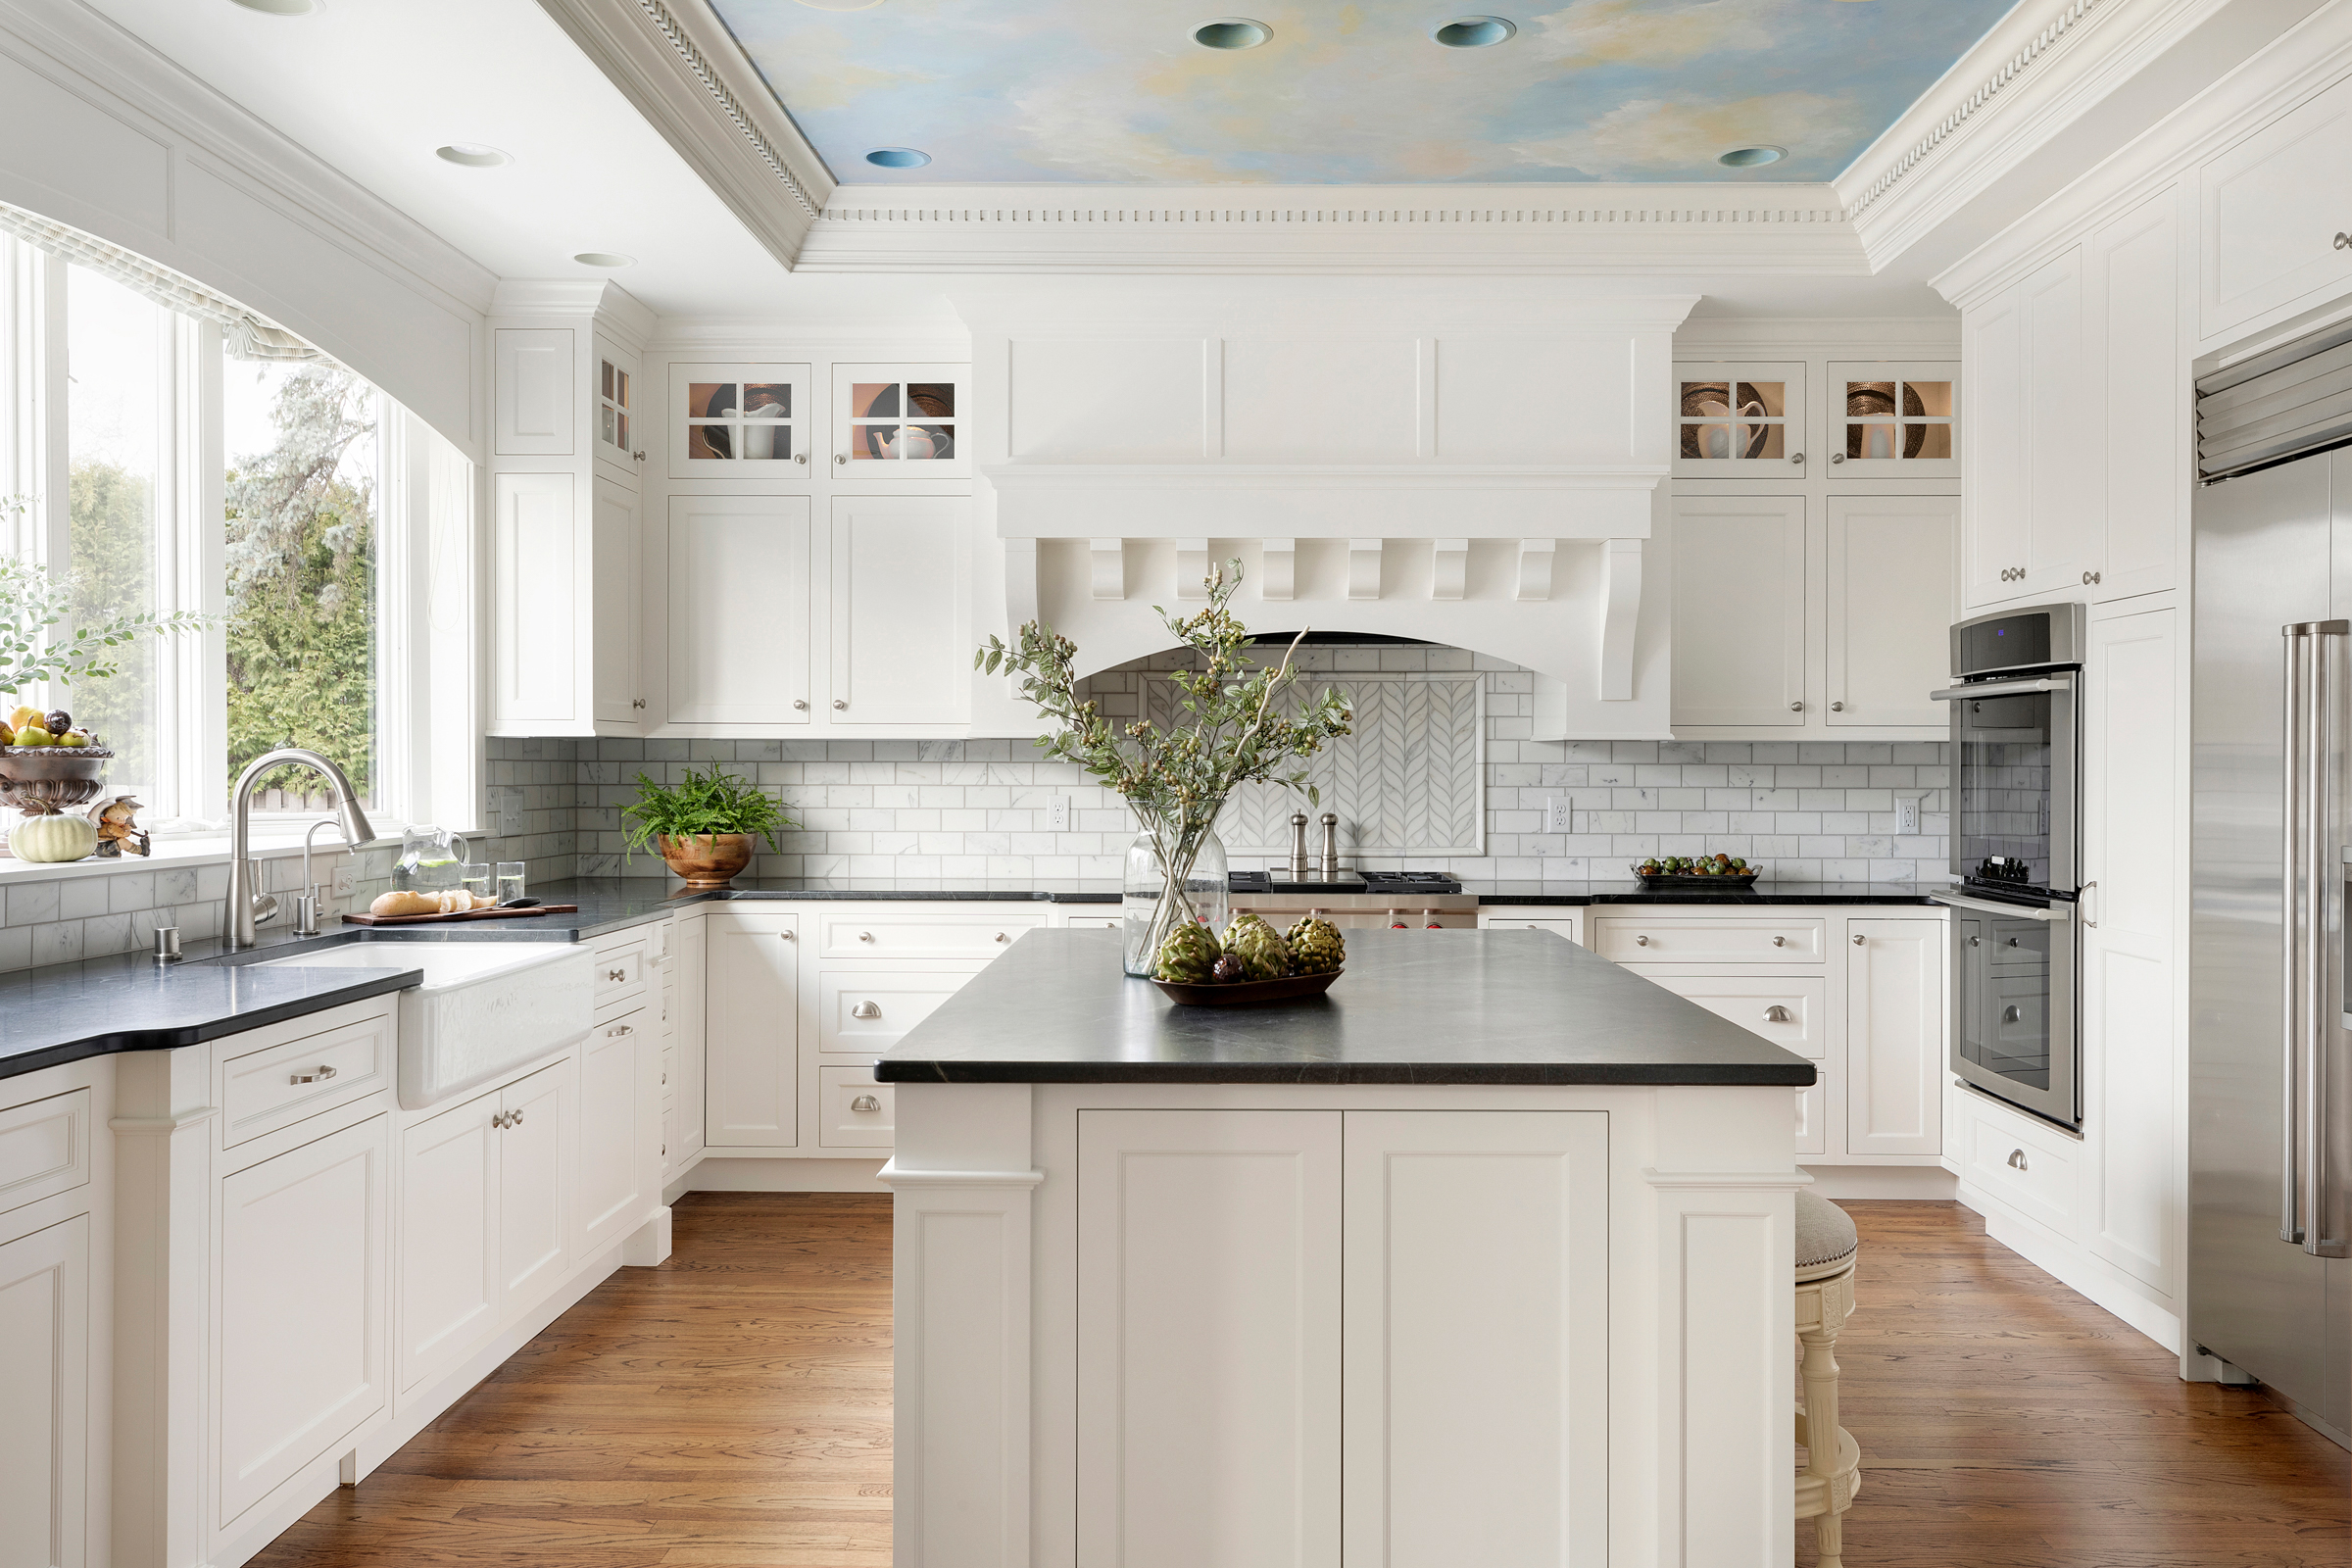 Kitchen Design Cabinets to Ceiling 